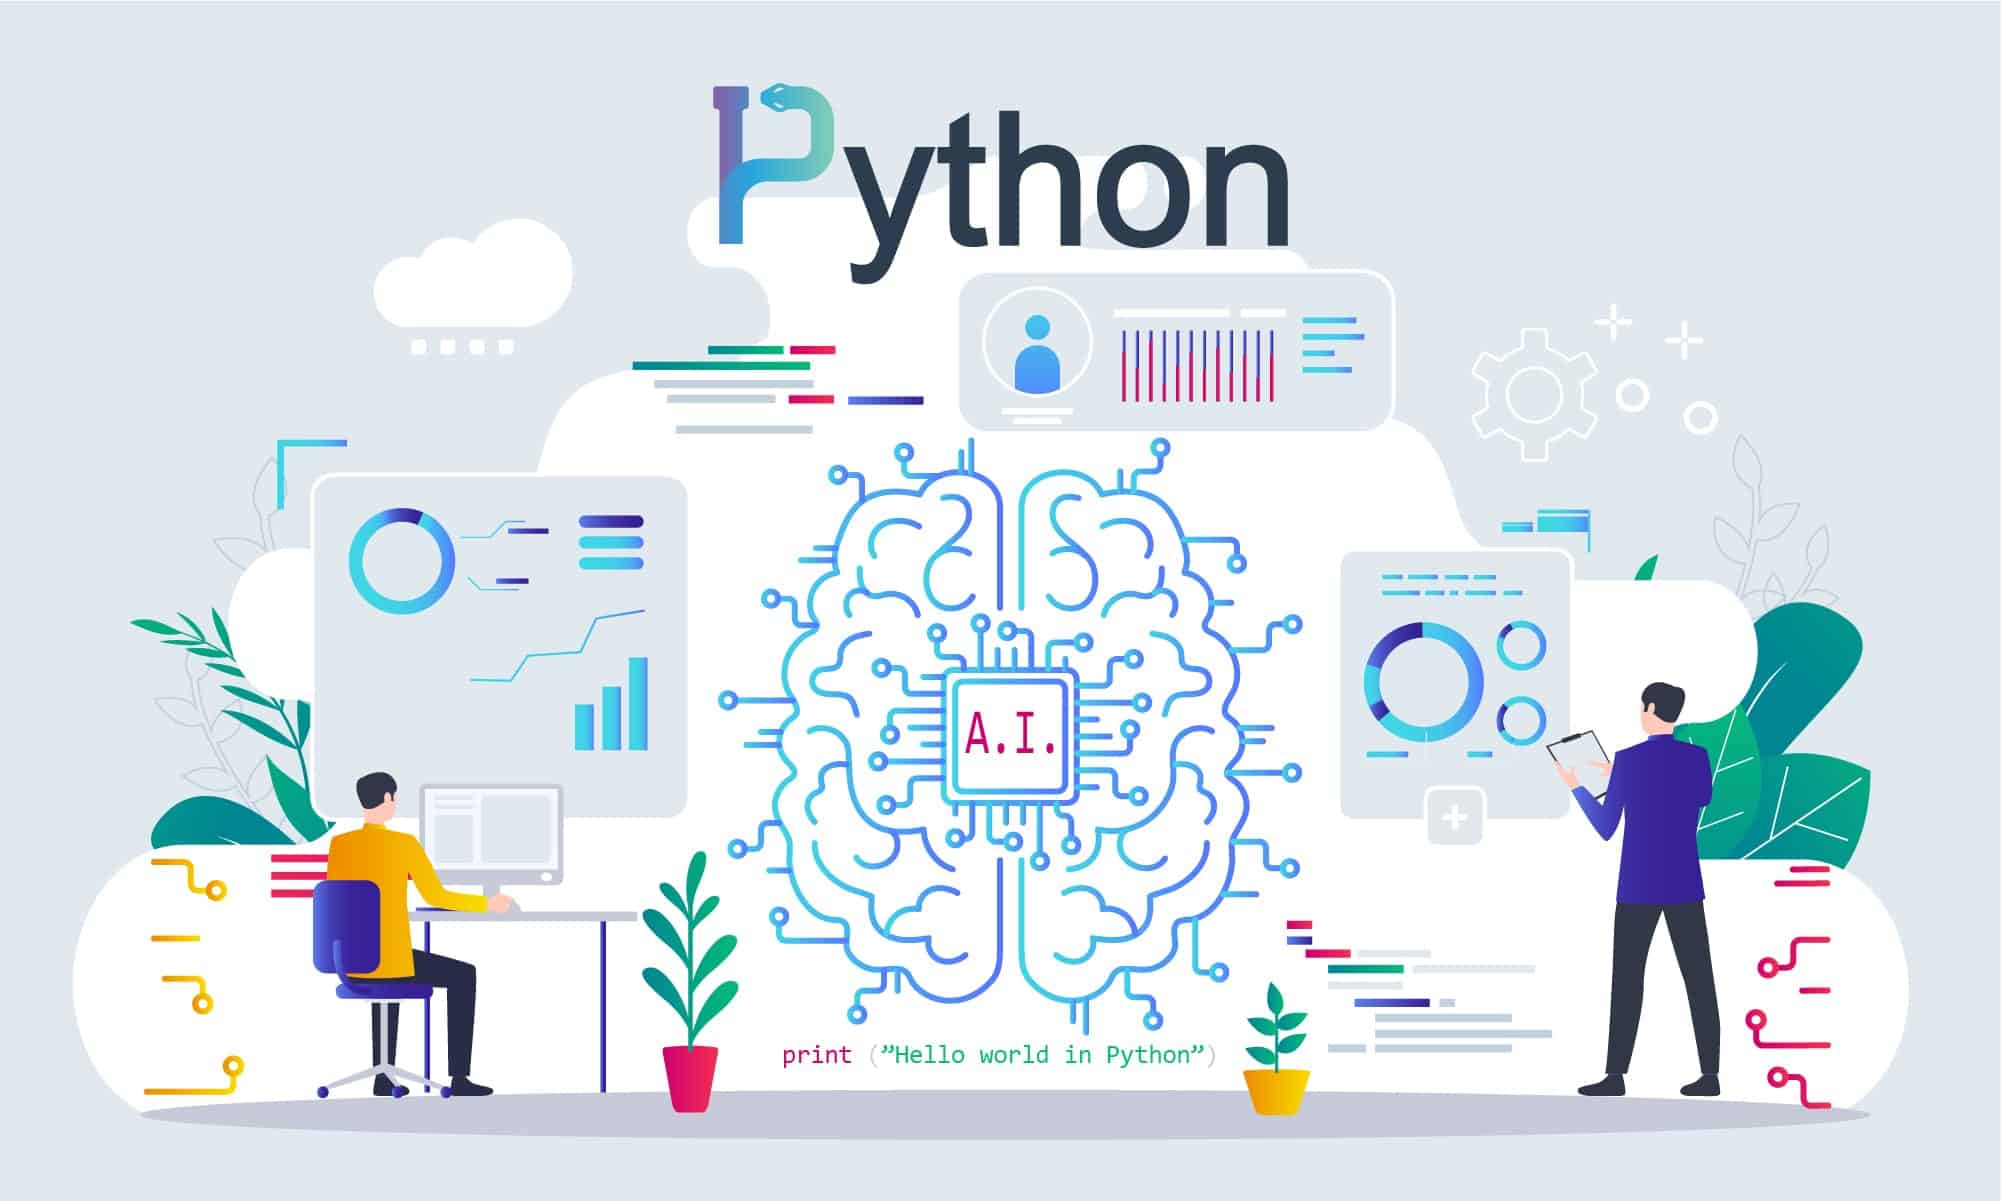 Python is great for data science apps